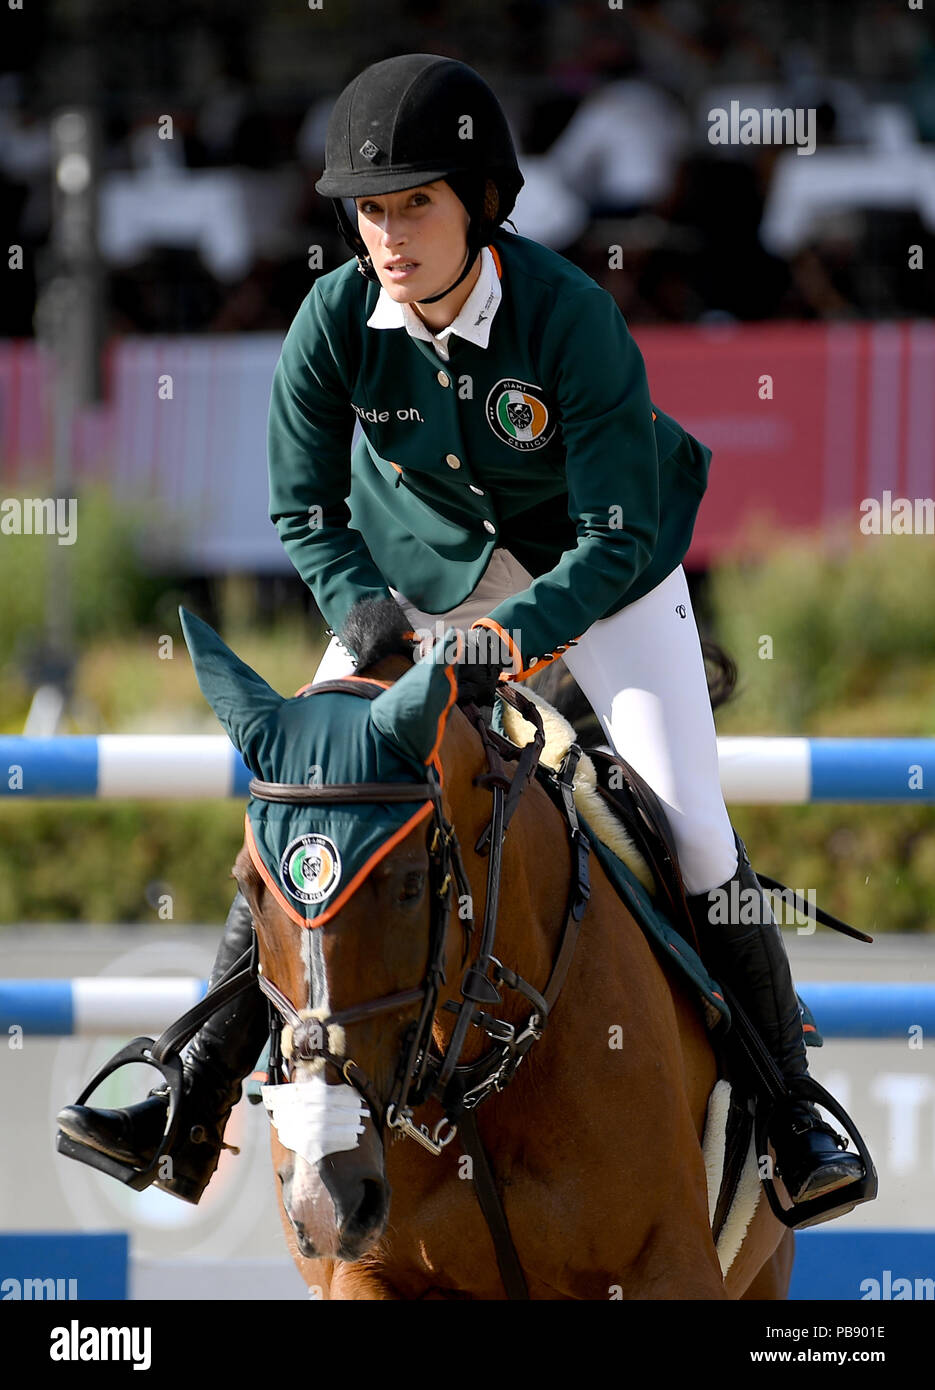 Berlin, Germany. 29th July, 2018. Equestrian sports/jumping, Global Champions Tour: Jessica Springsteen from the USA, on RMF Swinny du Parc jump over an obstacle. Credit: Britta Pedersen/dpa-Zentralbild/dpa/Alamy Live News Stock Photo